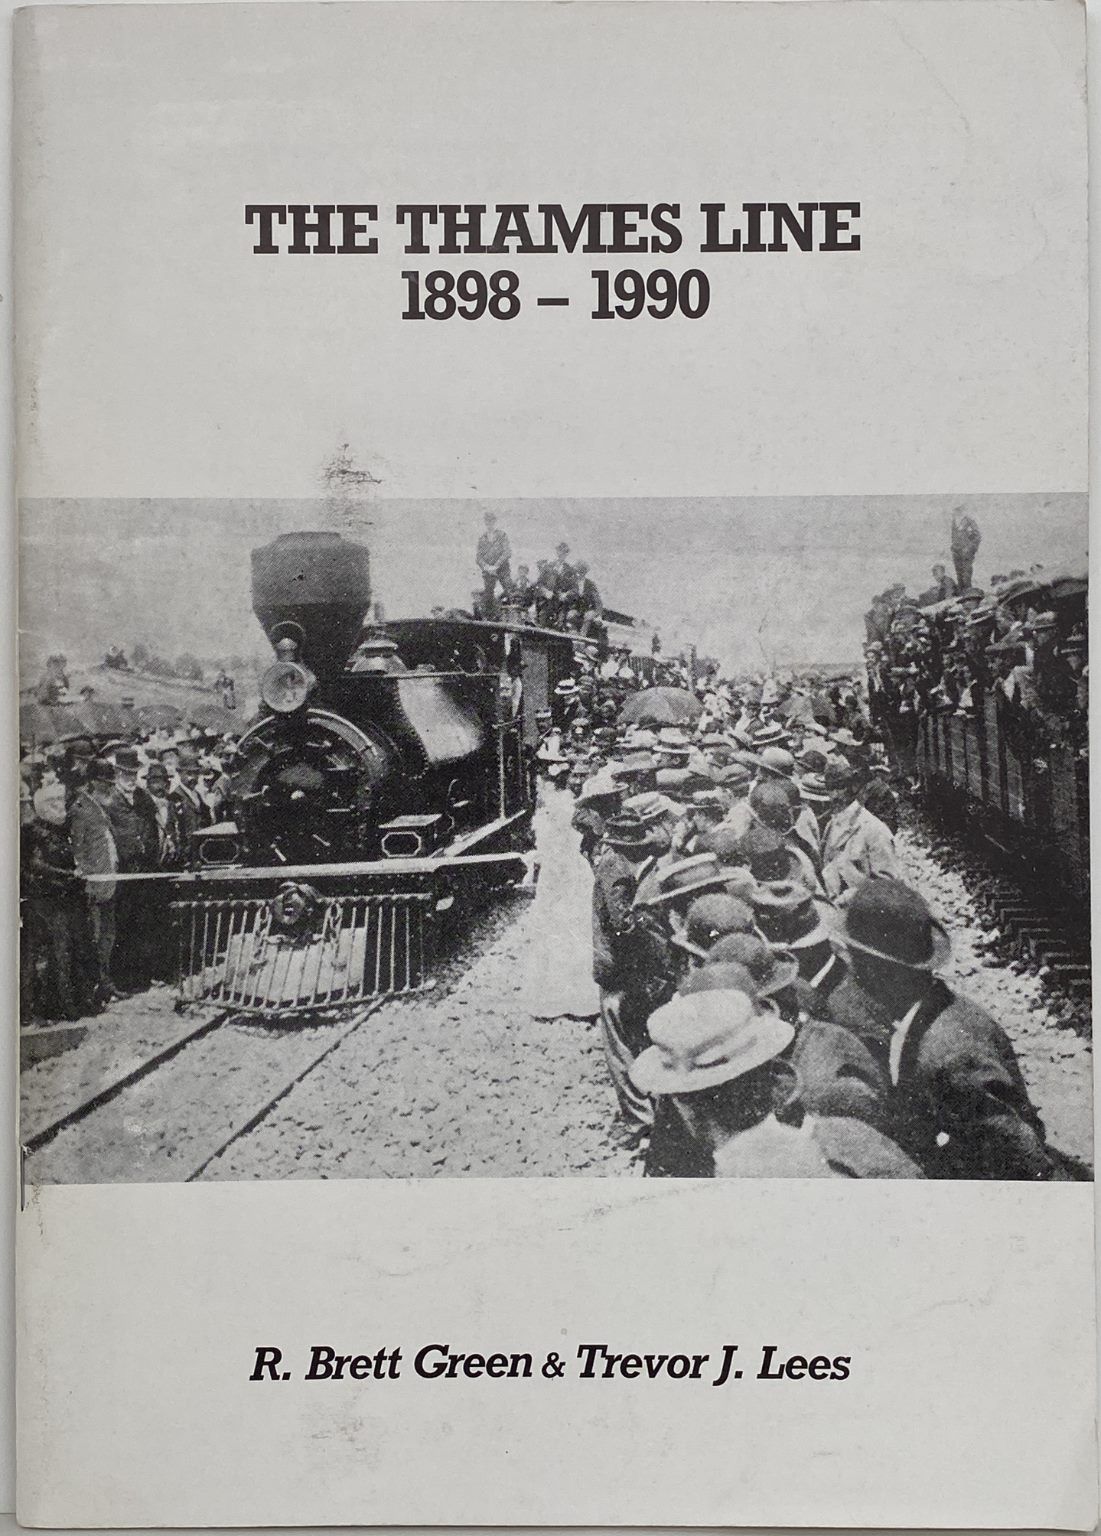 THE THAMES LINE 1898-1990